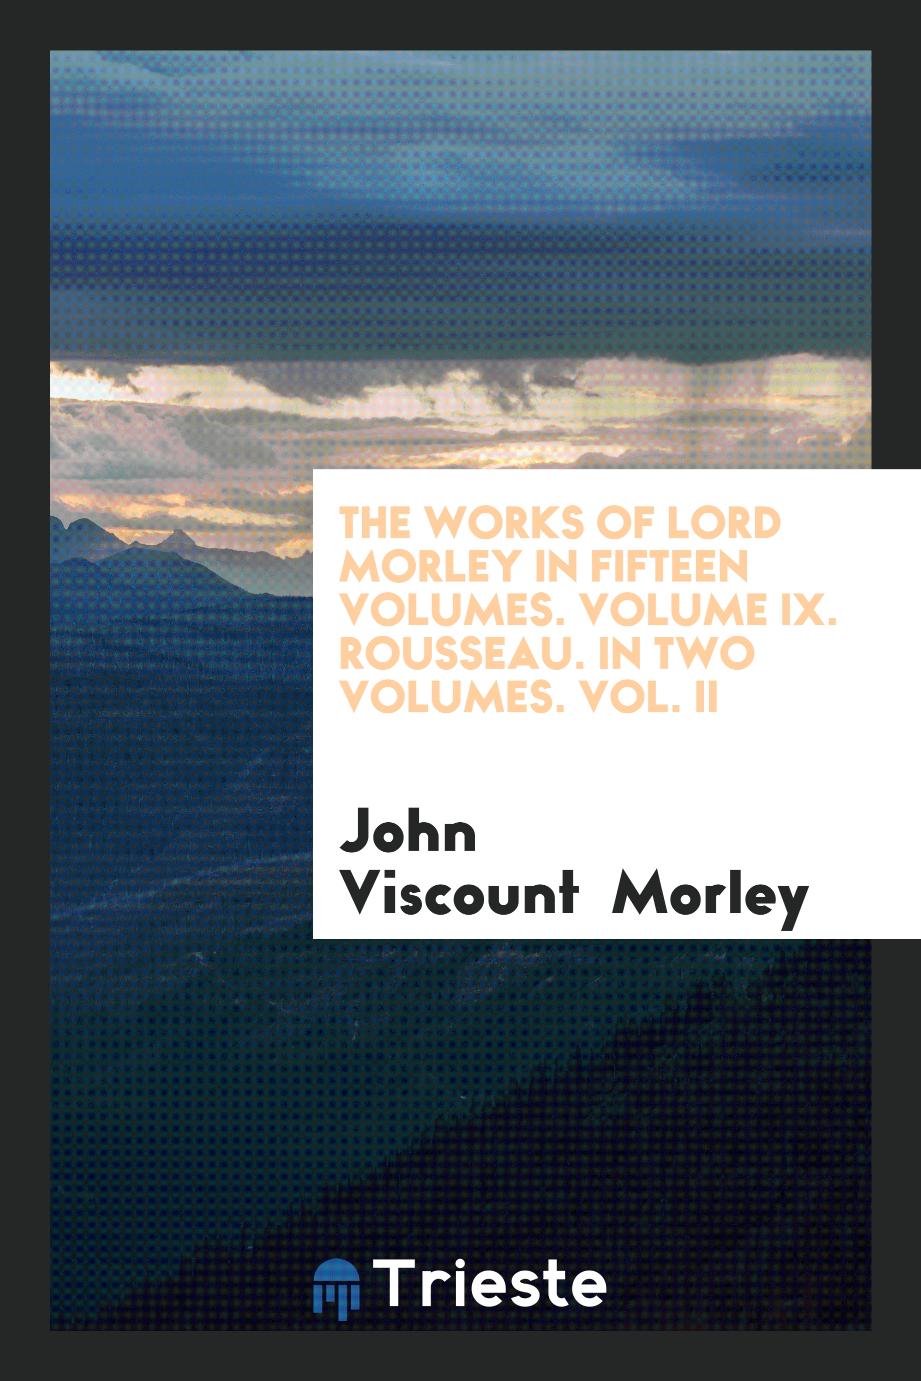 The Works of Lord Morley in fifteen volumes. Volume IX. Rousseau. In two volumes. Vol. II